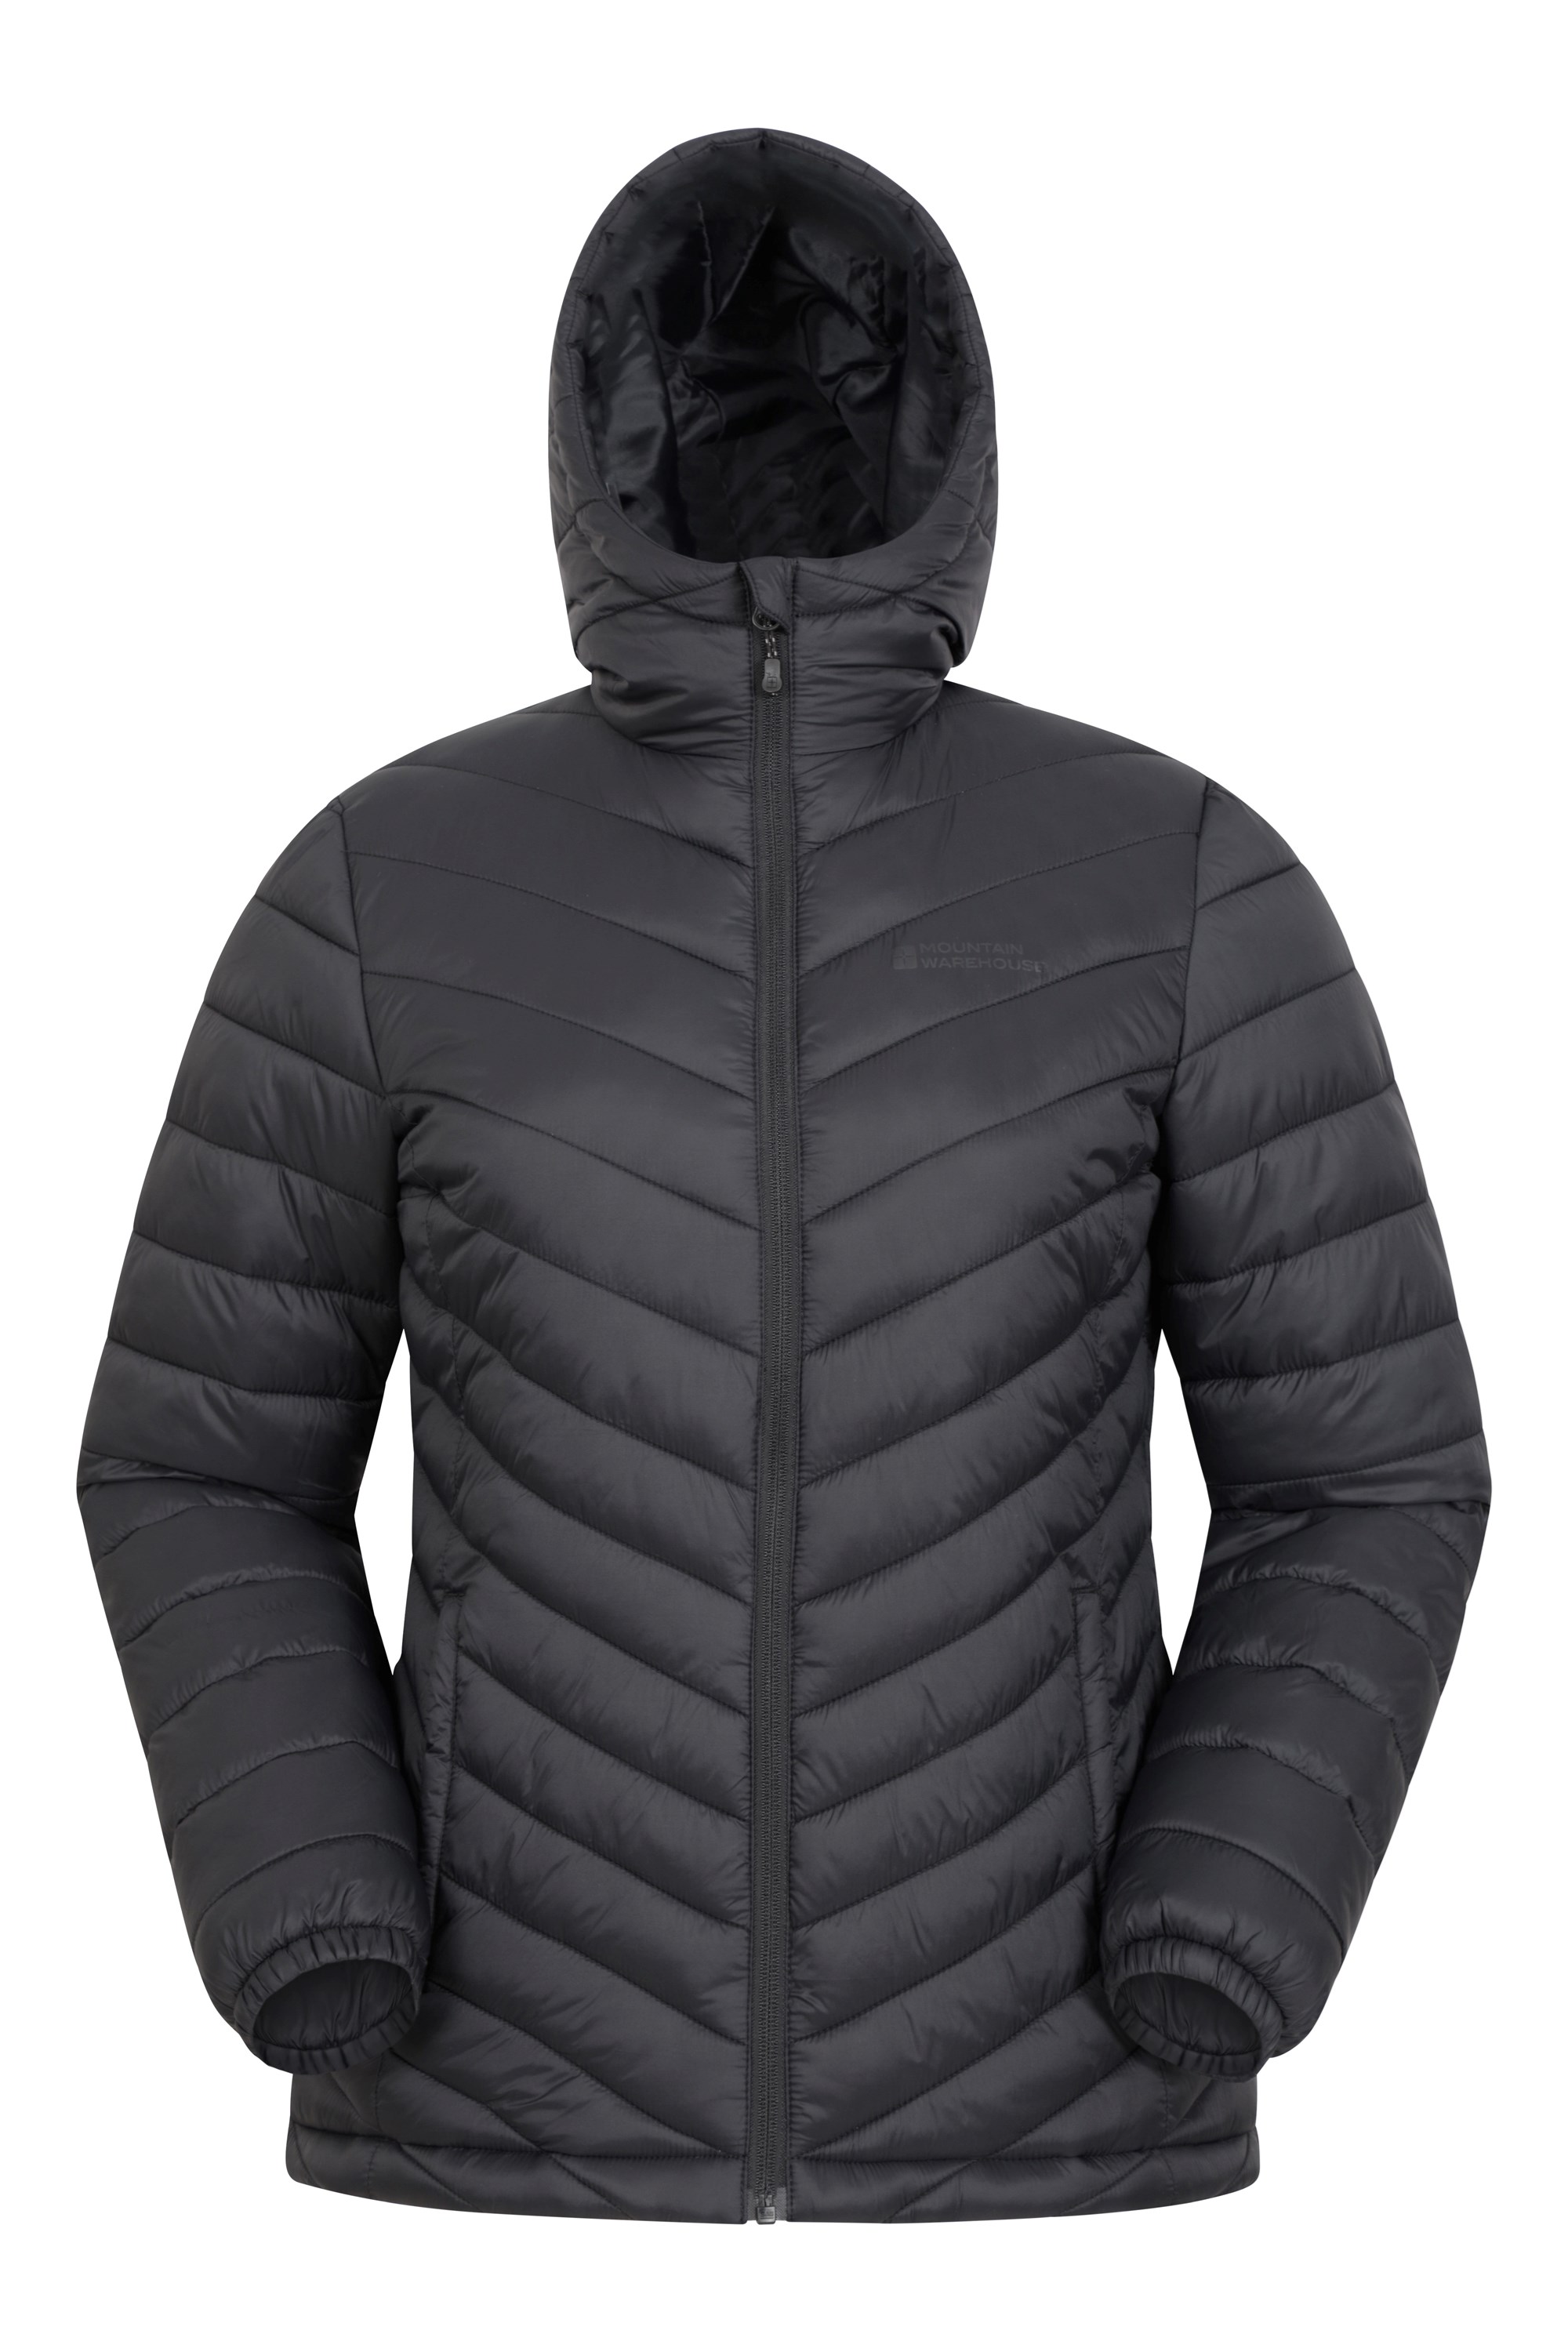 Womens Clothing Jackets Padded and down jackets Mountain Warehouse Water Resistant Ladies Winter in Black 